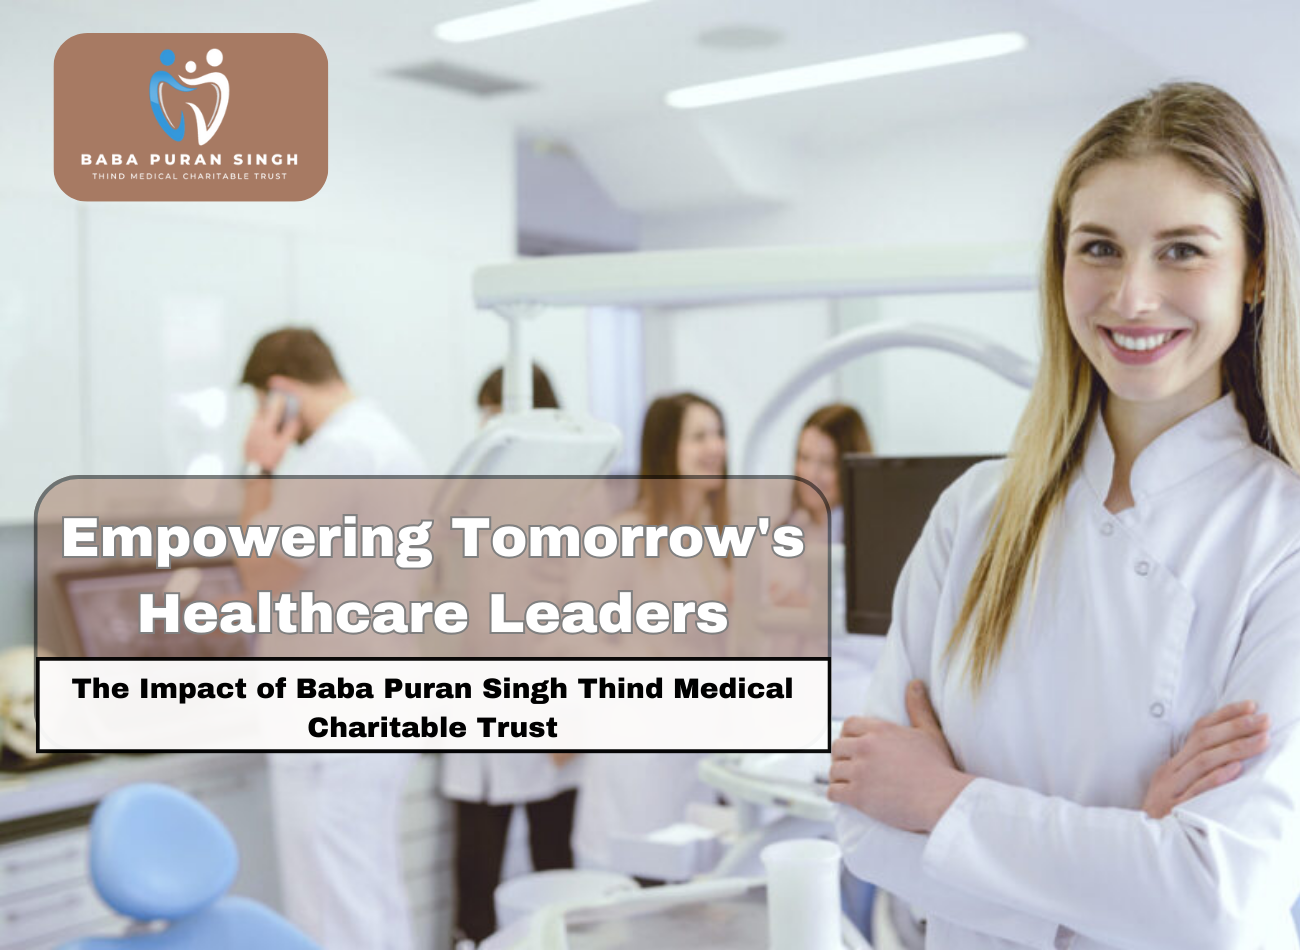 Empowering Tomorrow’s Healthcare Leaders: The Impact of Baba Puran Singh Thind Medical Charitable Trust